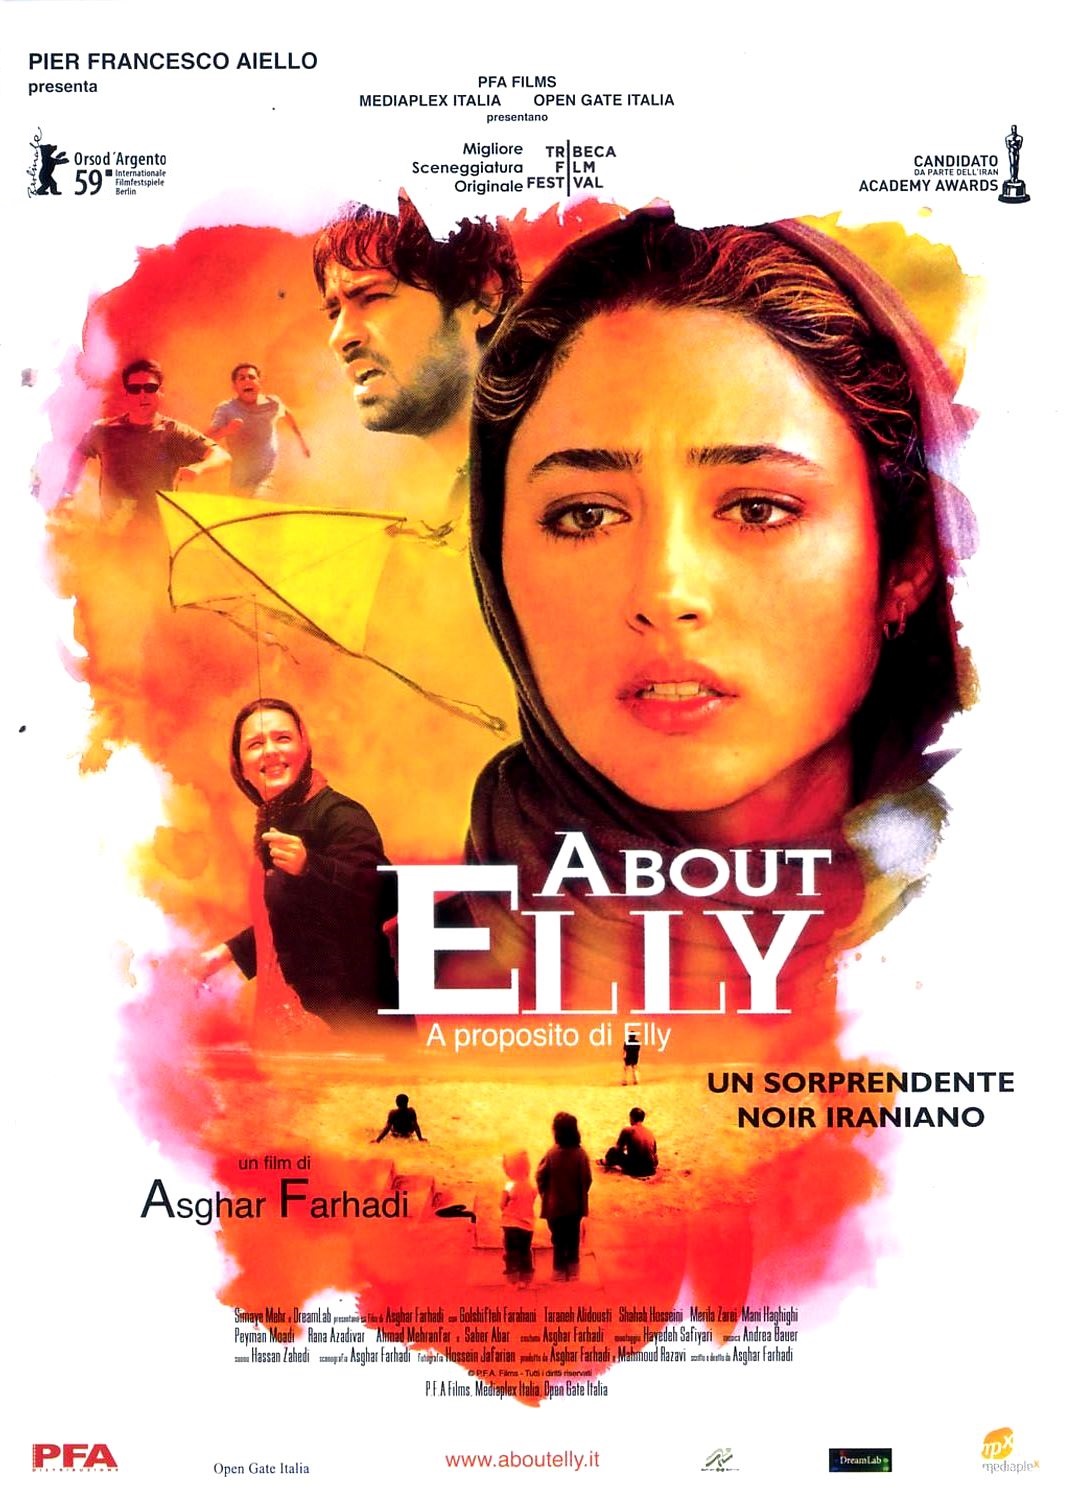 About Elly [HD] (2010)